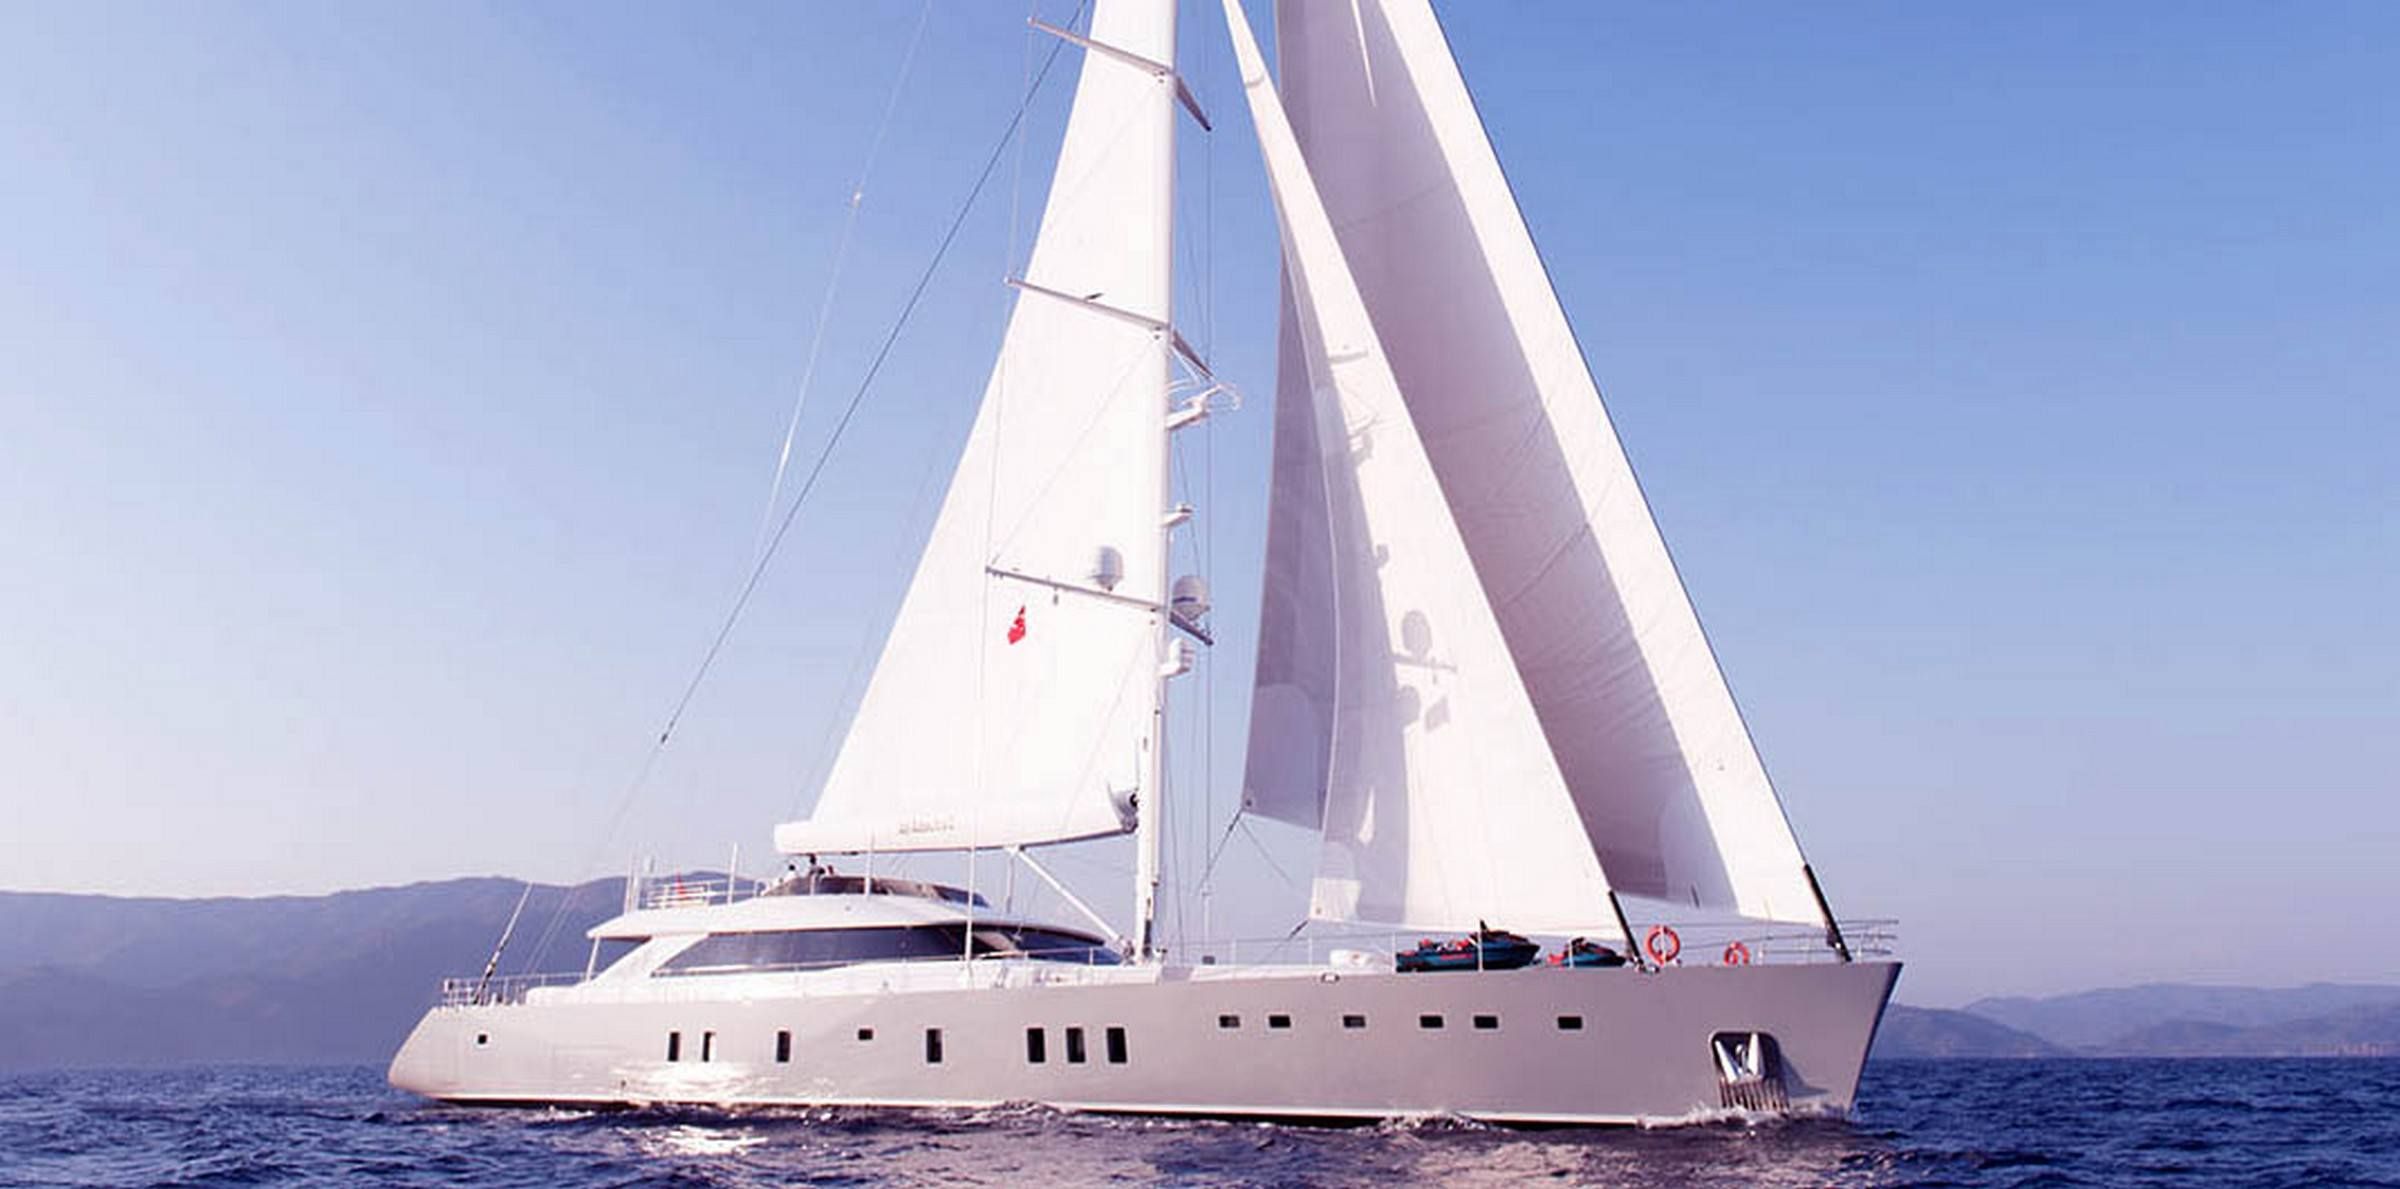 All About U2 Sailing Yacht